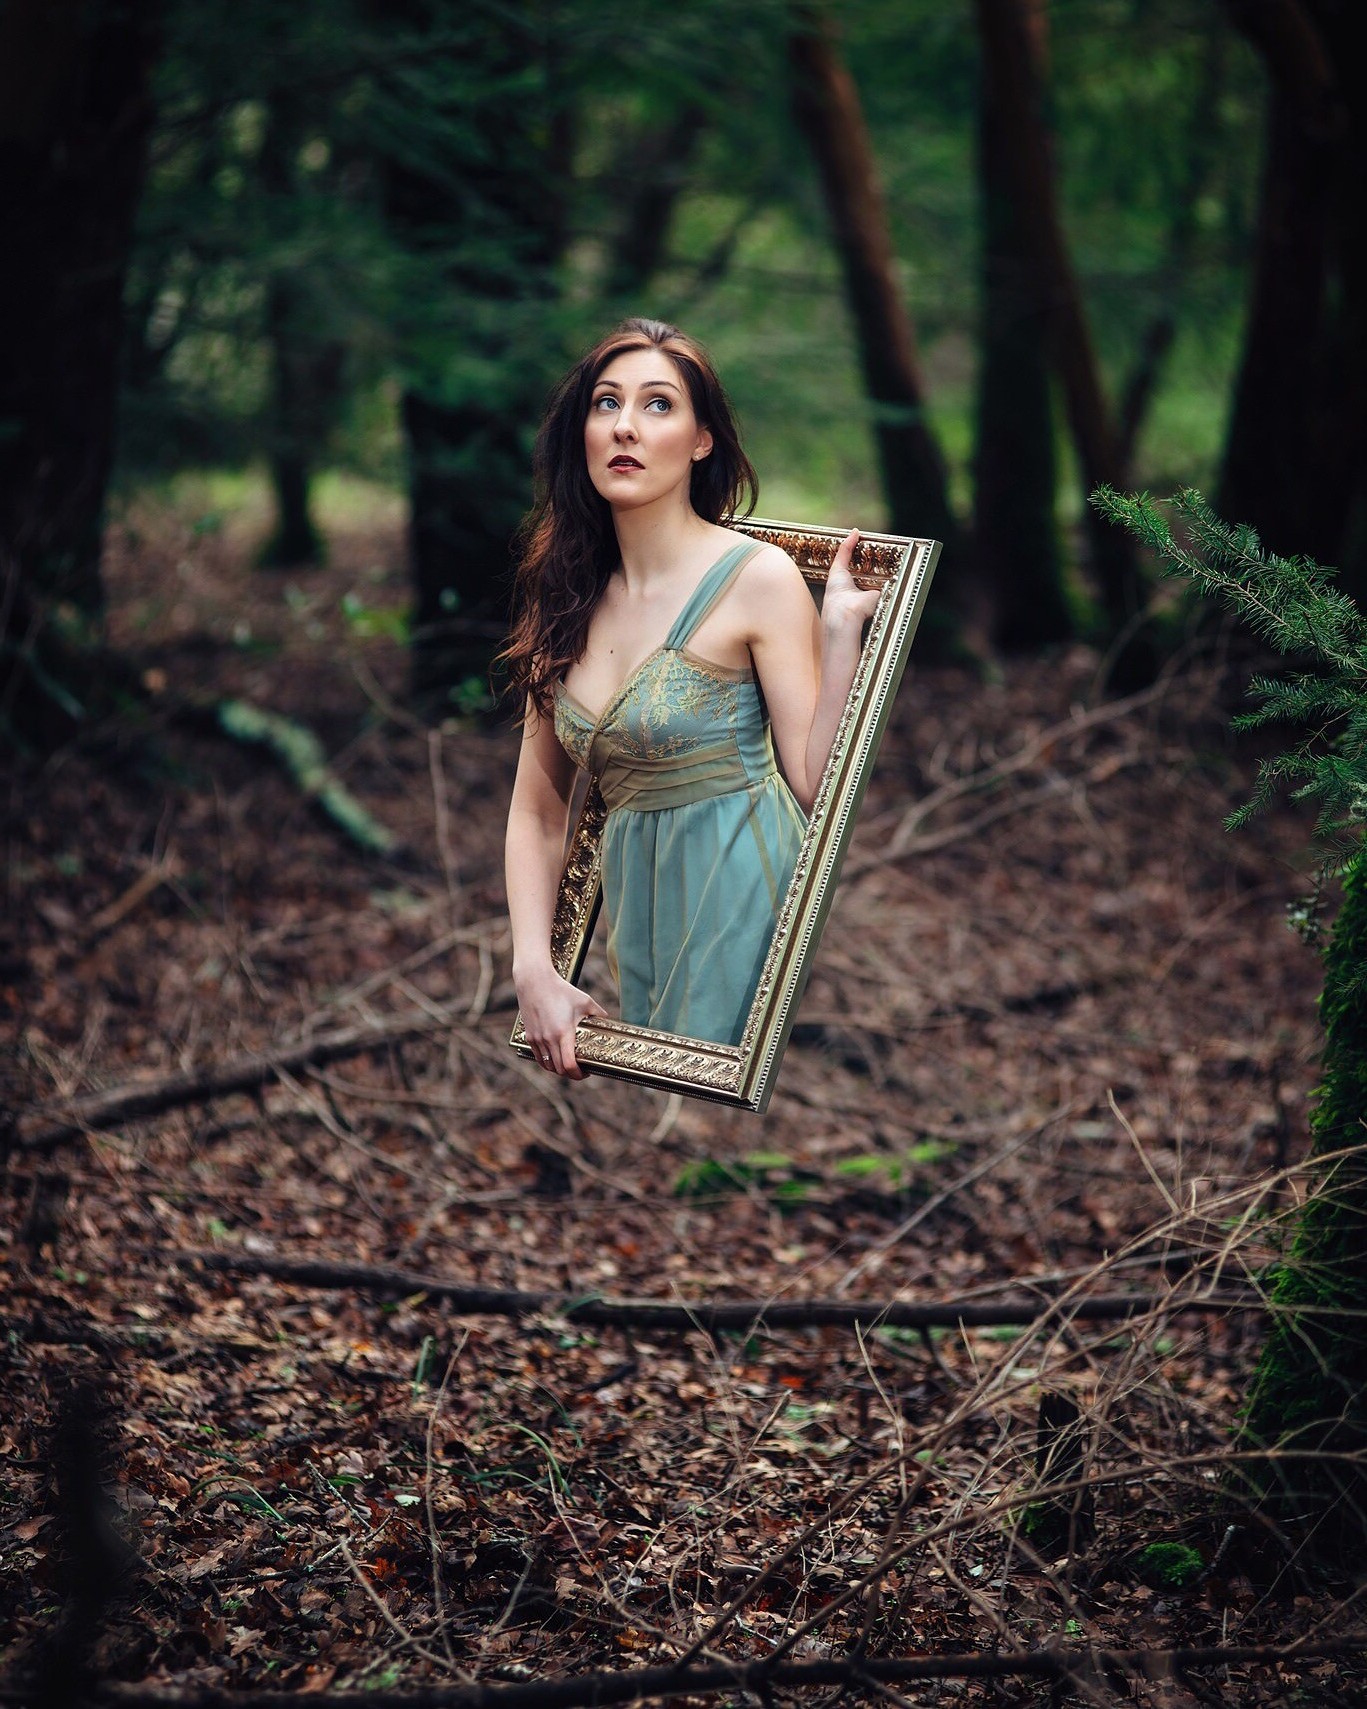 women, Model, Brunette, Long Hair, Women Outdoors, Bare Shoulders, Looking Up, Trees, Picture Frames, Photo Manipulation, Magic, Blue Dress, Nature, Forest, Mystery, Portrait Display Wallpaper